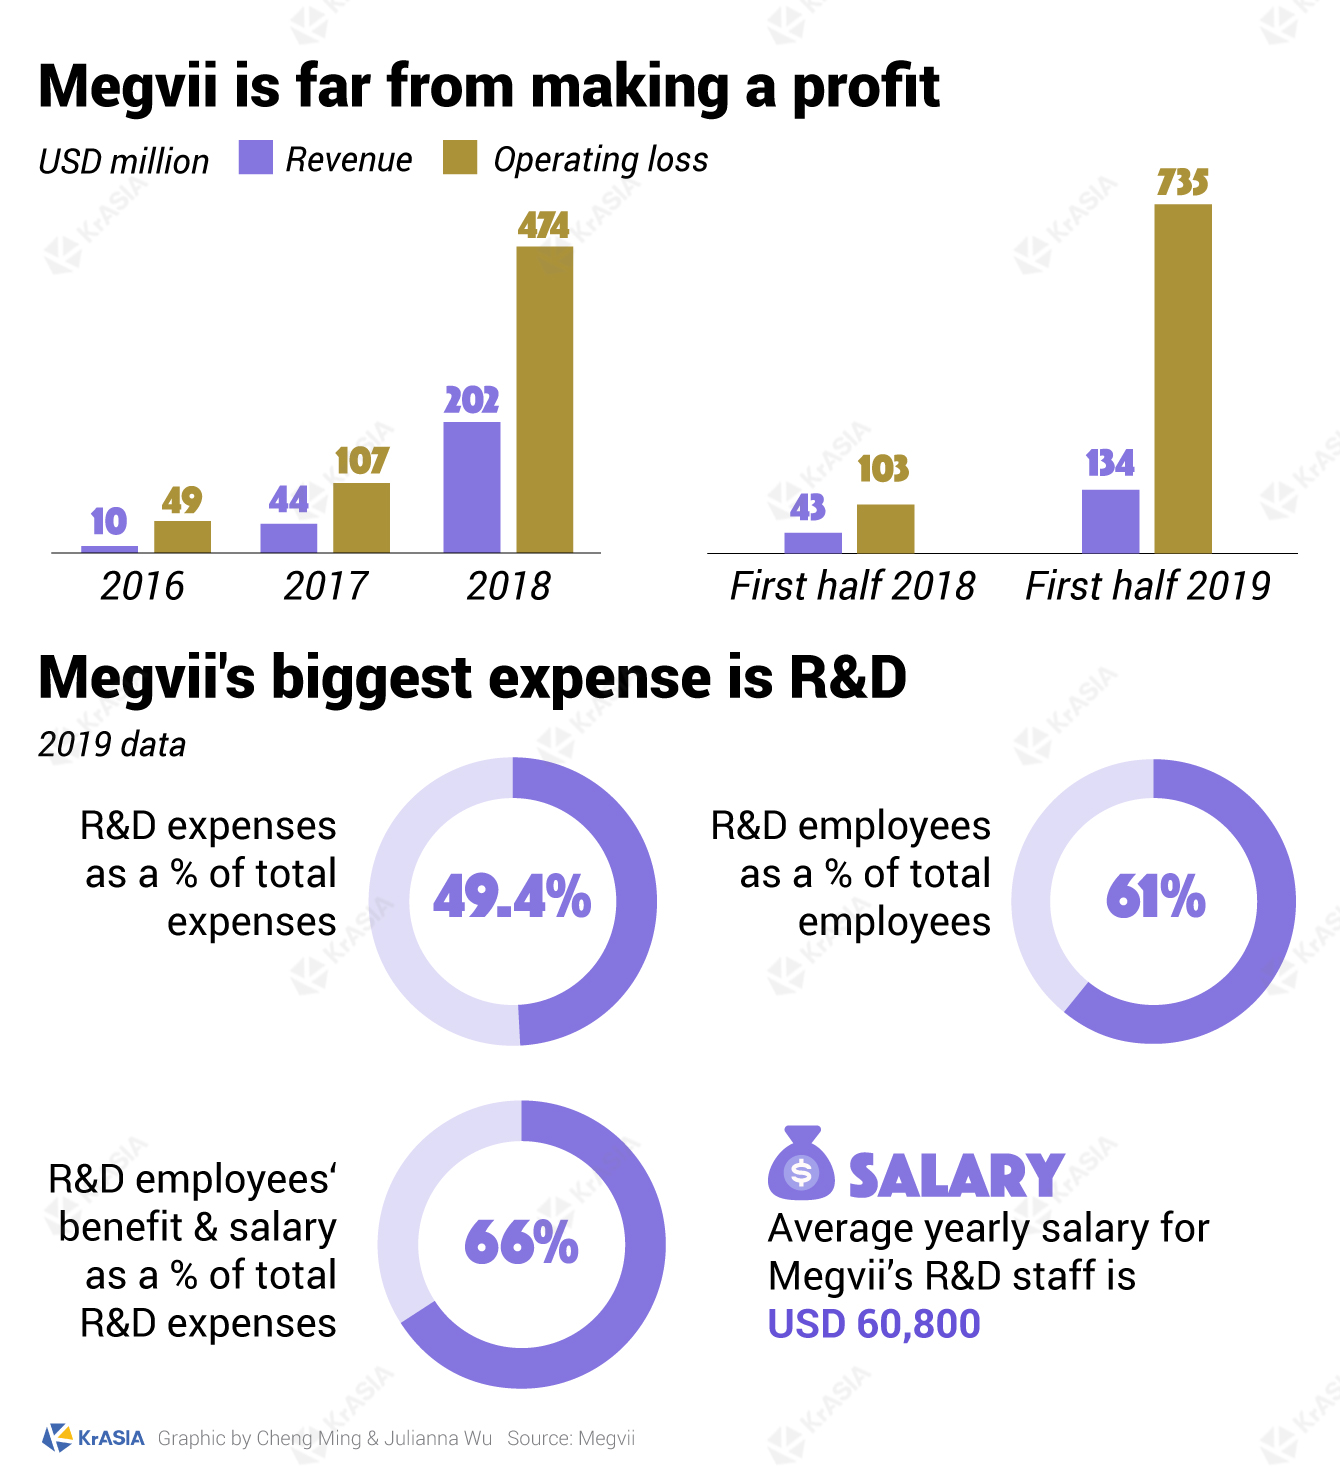 China AI startup Megvii's net loss, revenues, and R&D expenses